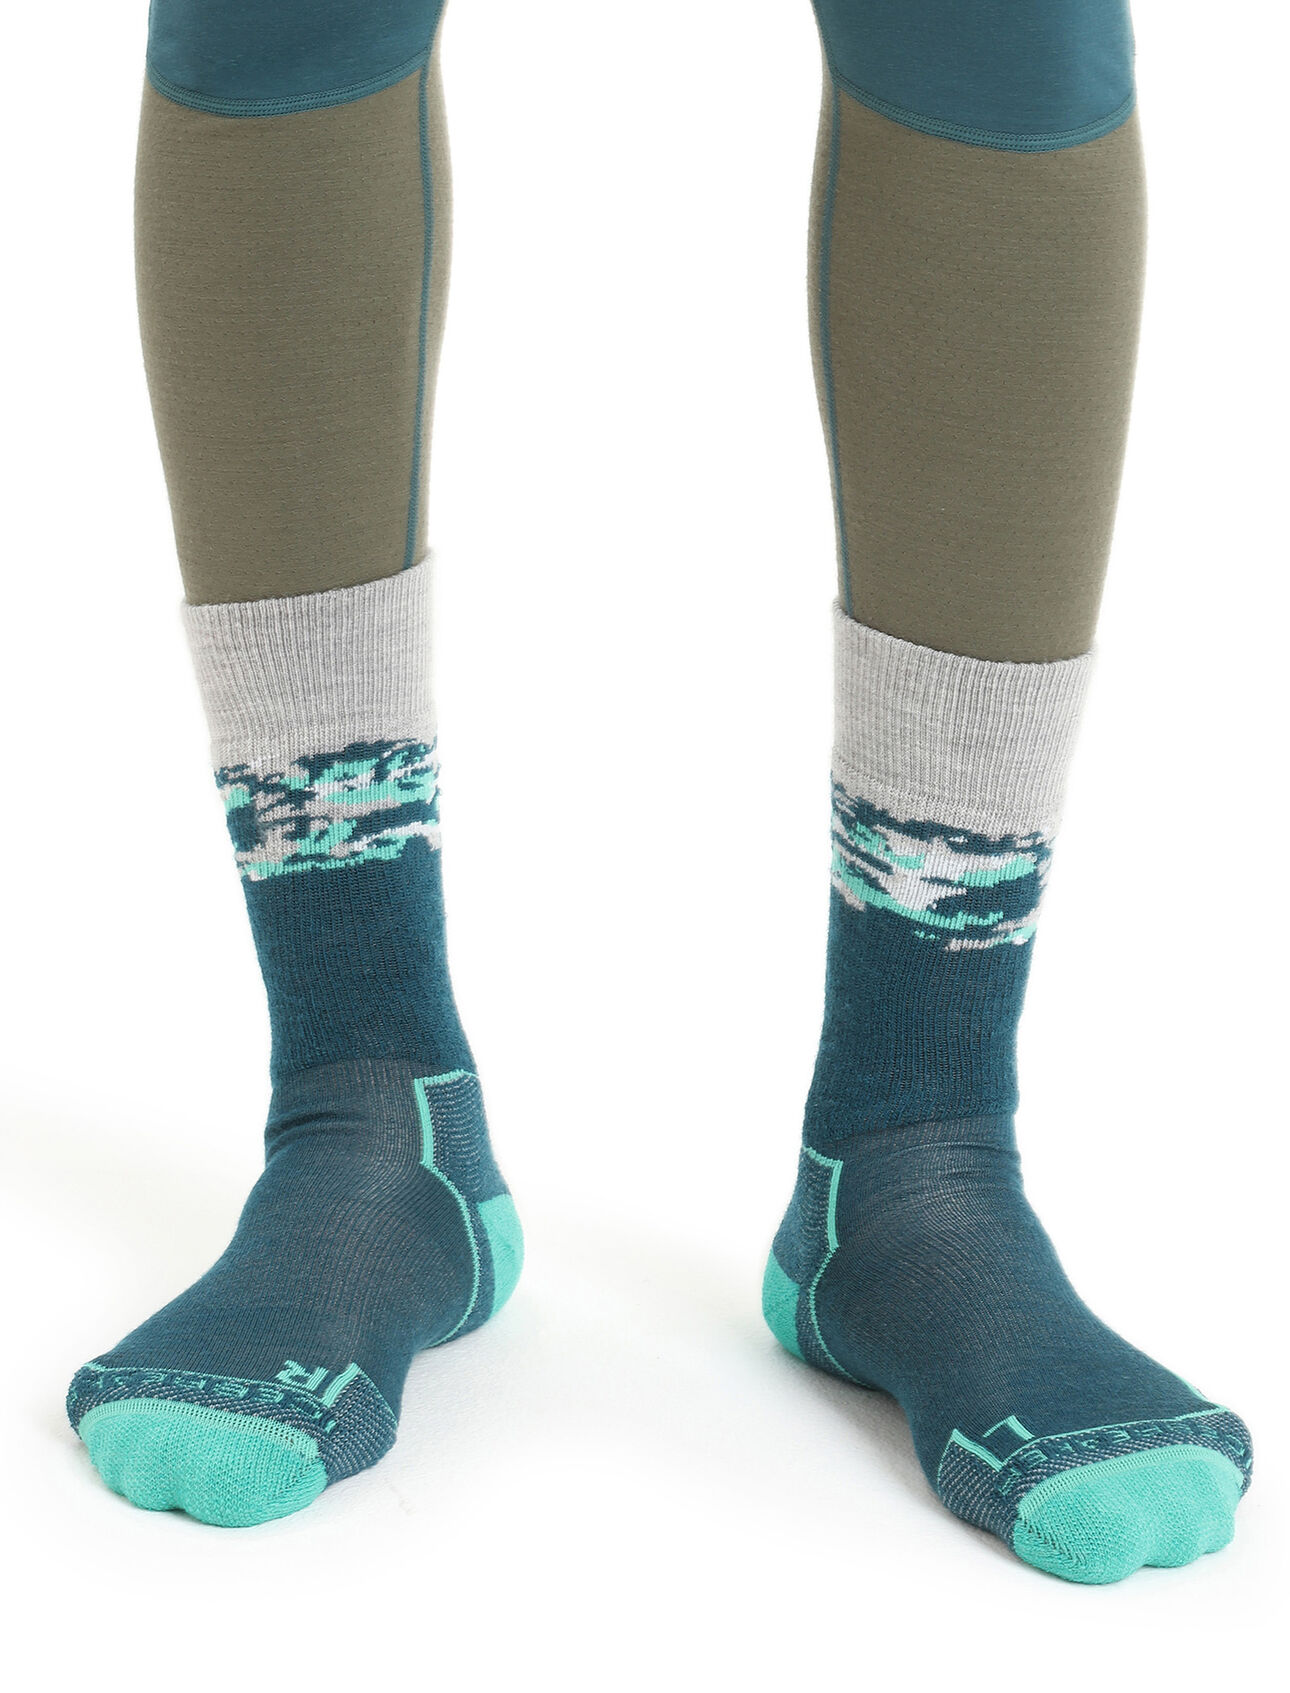 Mens Merino Hike+ Medium Crew Sedimentary Socks Durable, crew-length merino wool socks that are stretchy, breathable, and naturally odor-resistant with full cushion, the Hike+ Medium Crew Sedimentary socks feature an anatomical sculpted design for day hikes and backpacking trips.